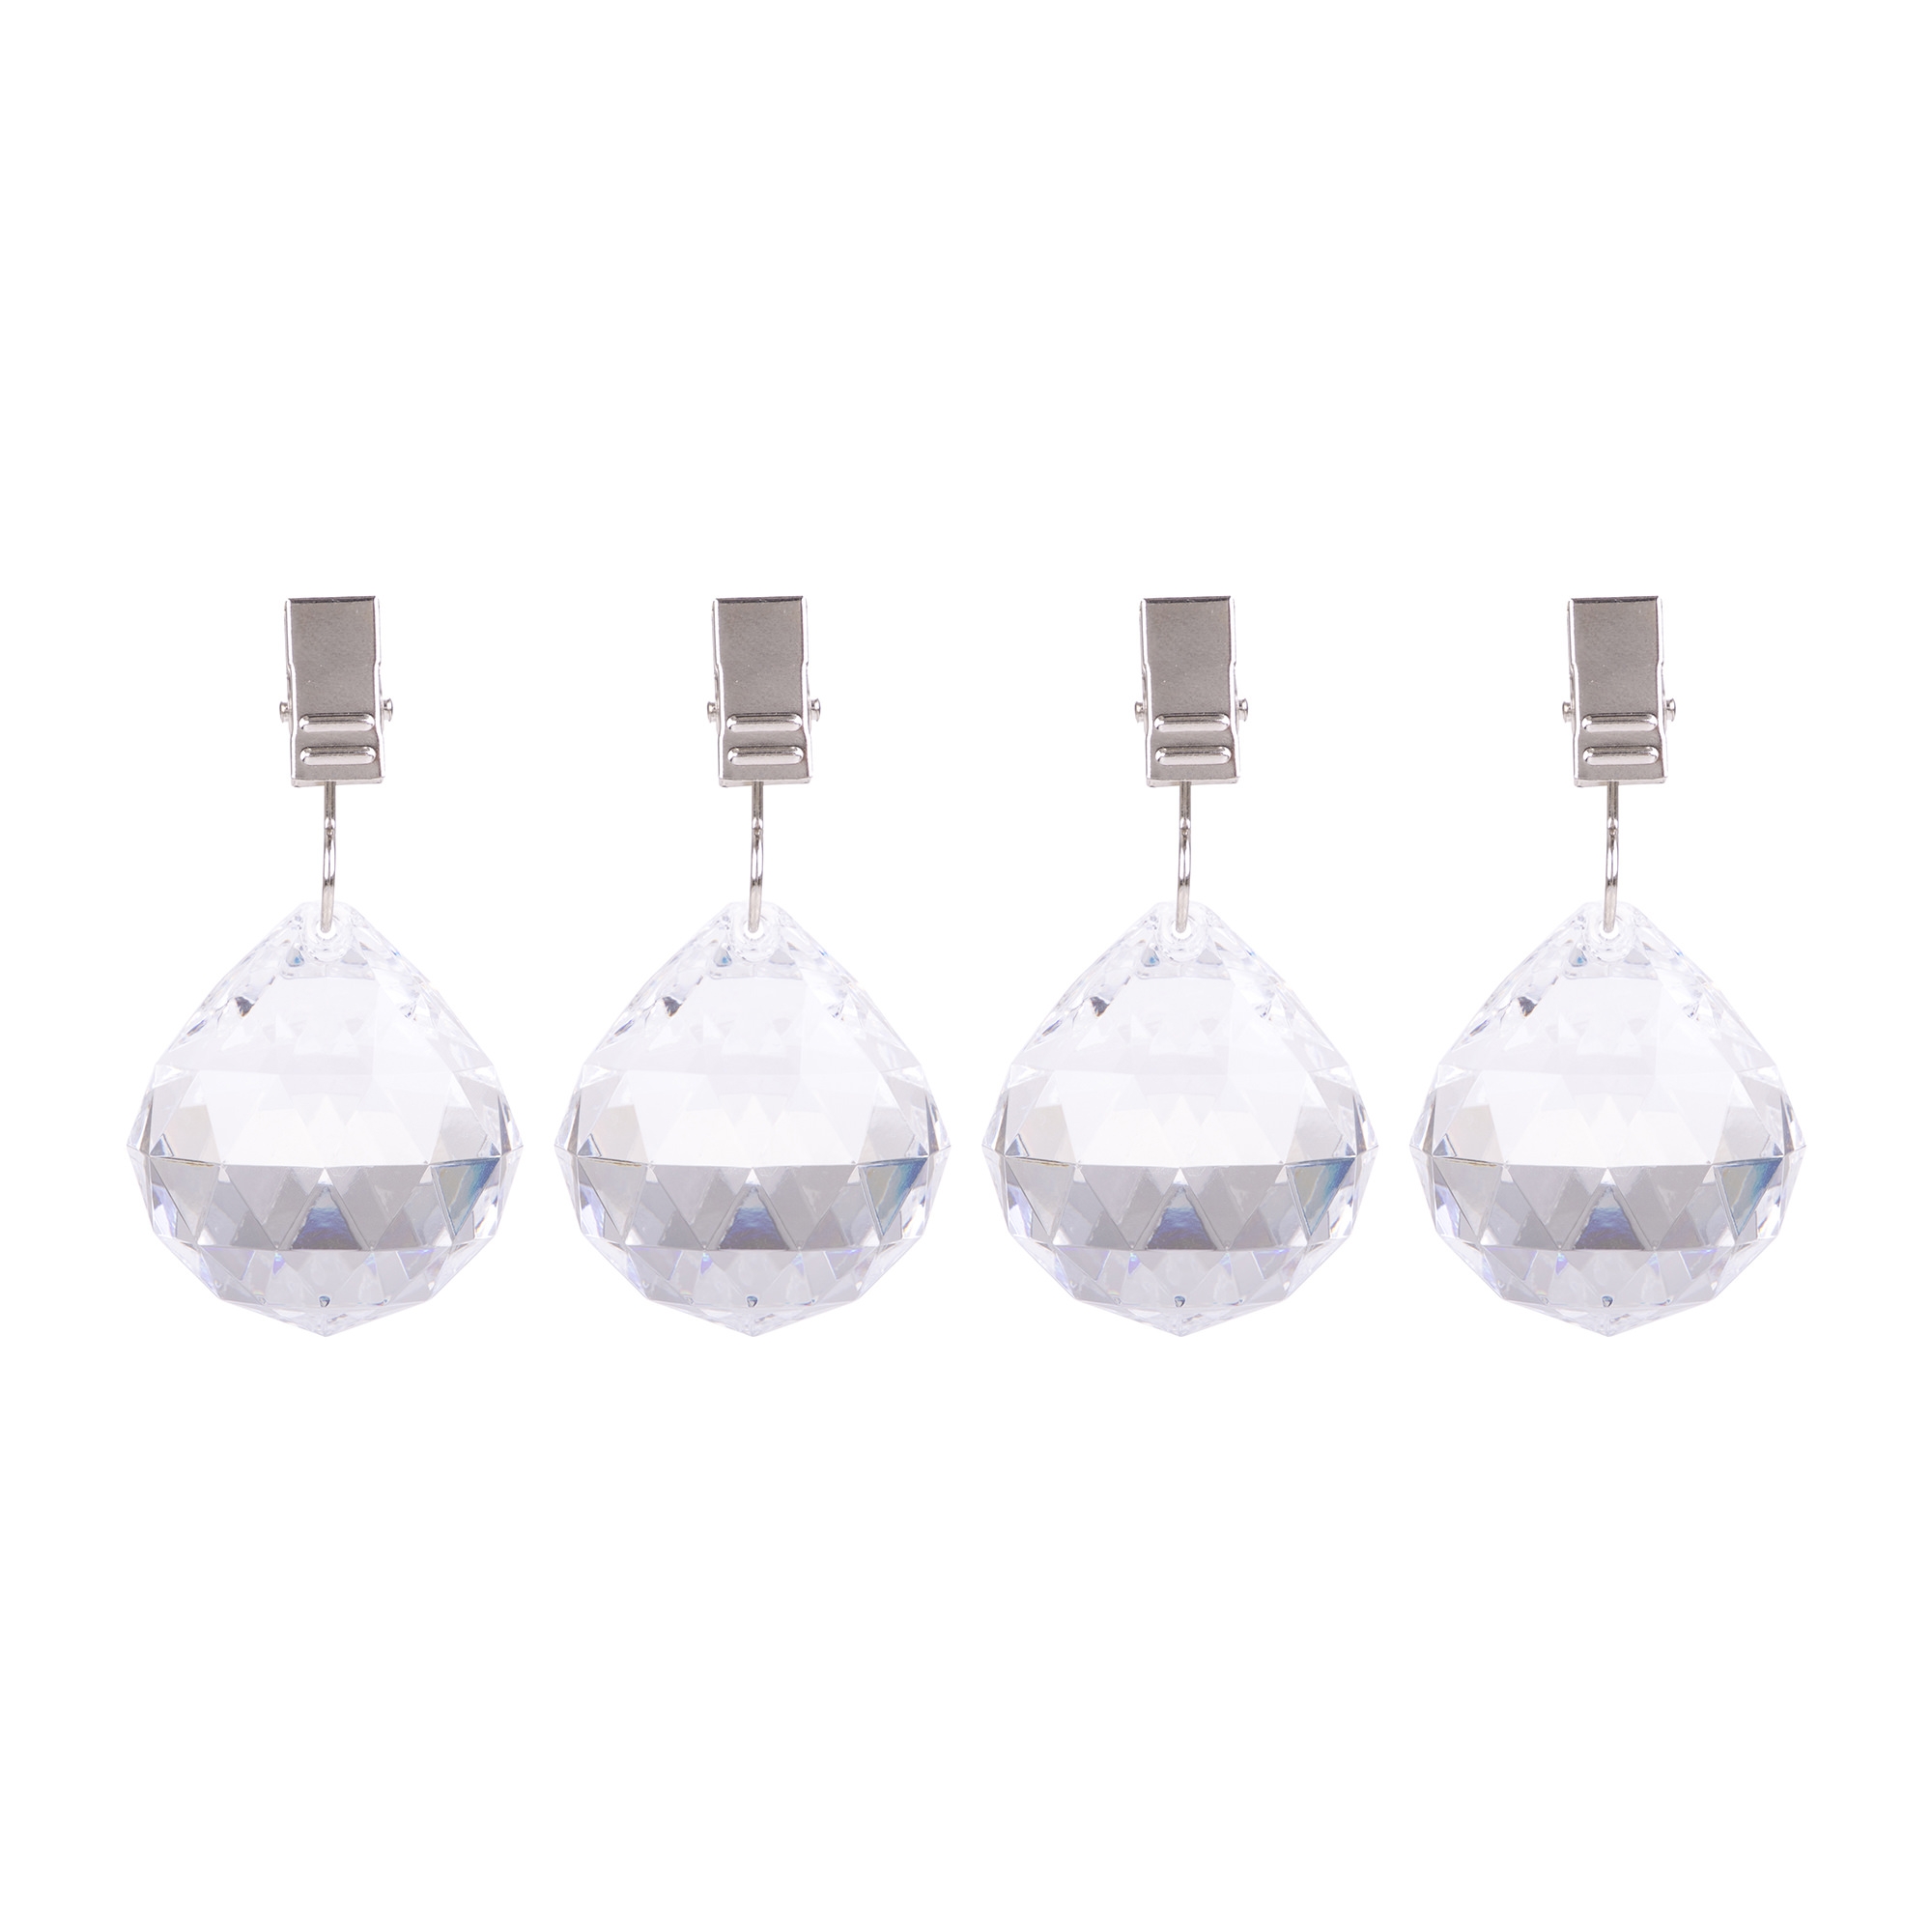 Pizzazz Acrylic Crystal Tablecloth Weights 4pk Image 2